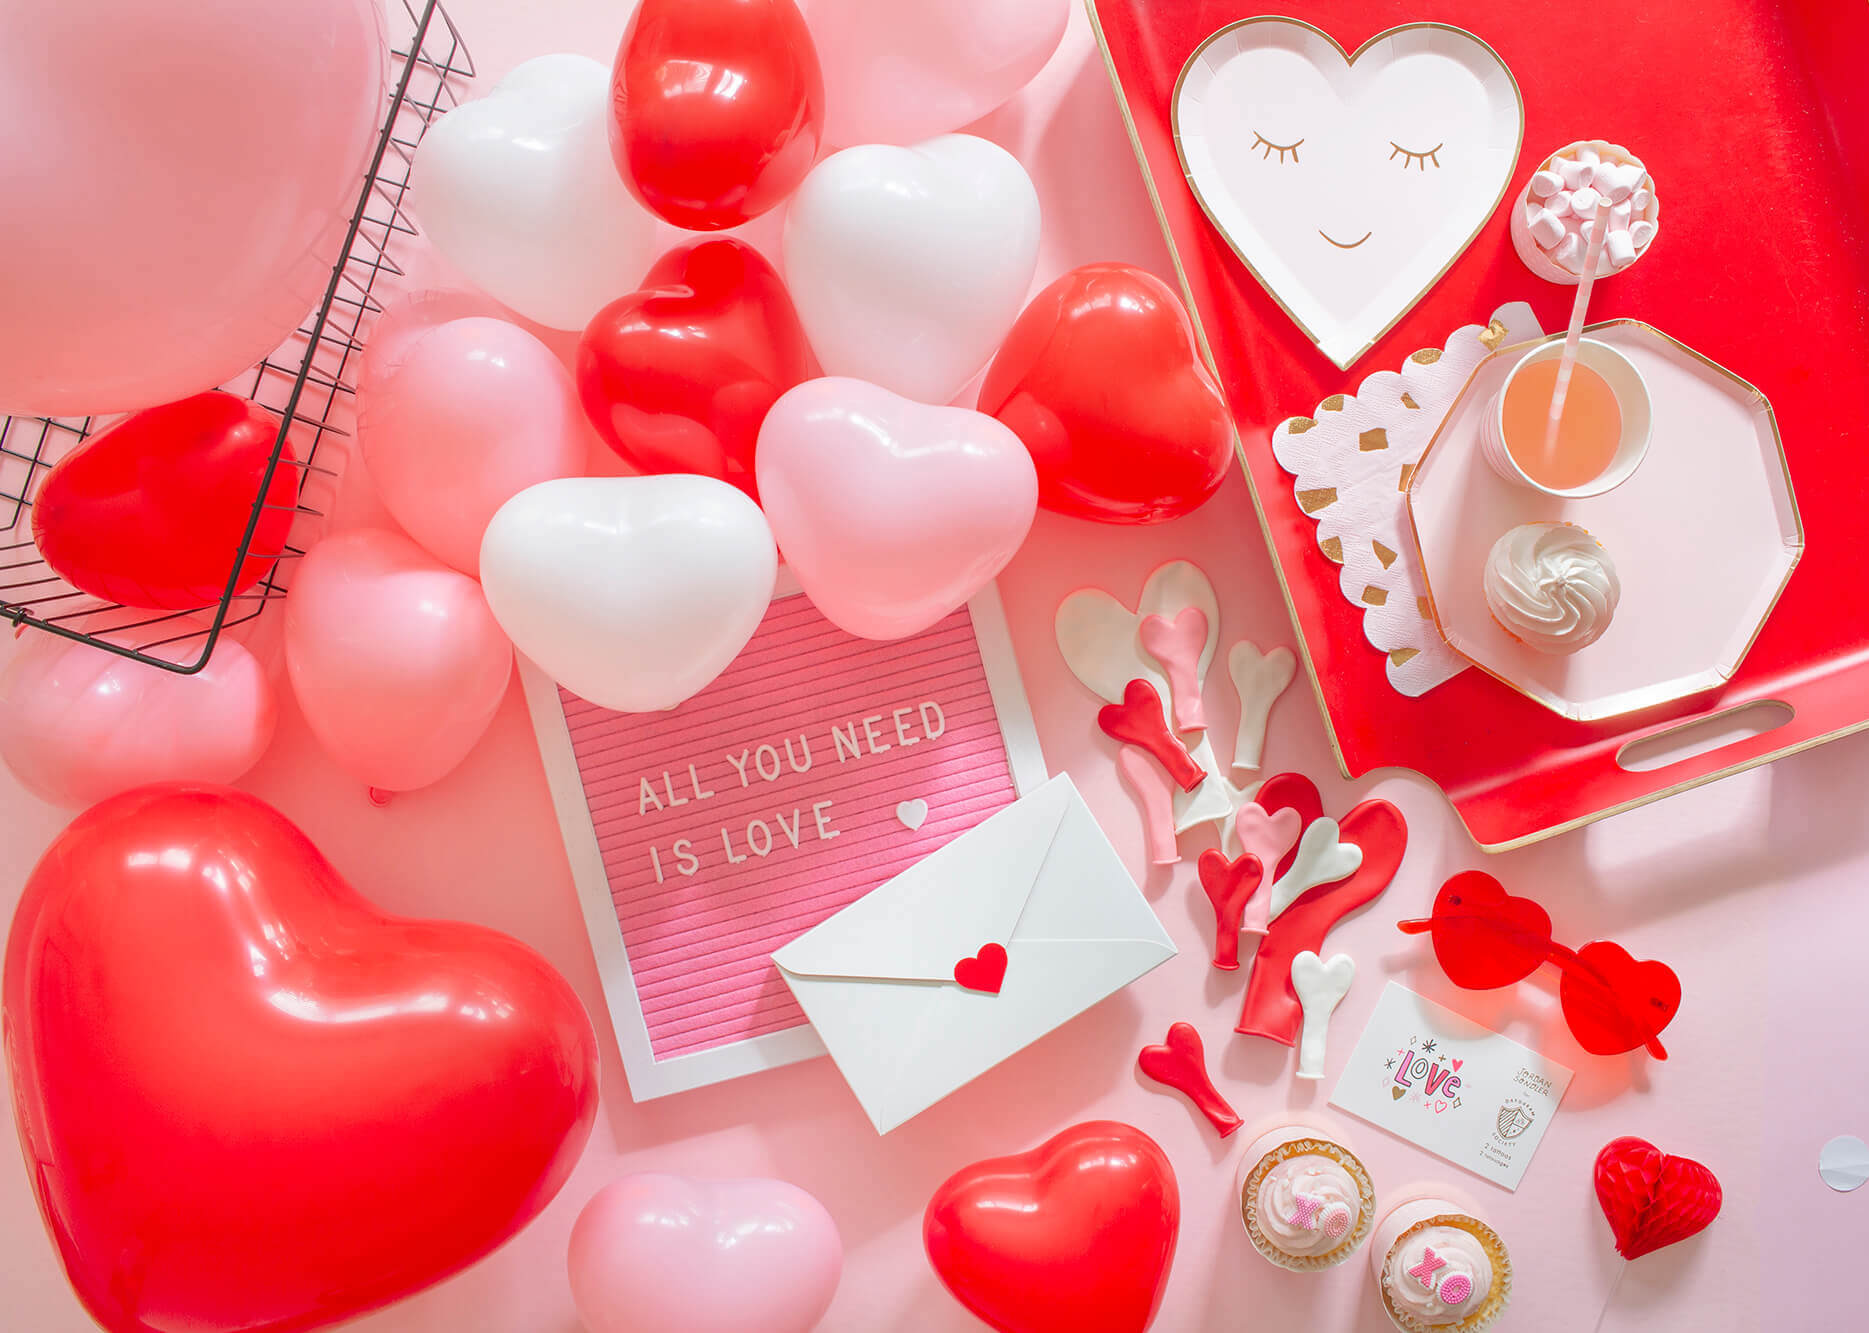 Valentine's Day Galentine's Party Ideas with Kids featuring heart-shaped latex balloons in pink, white and red and heart shaped plates in pink styled by Momo Party